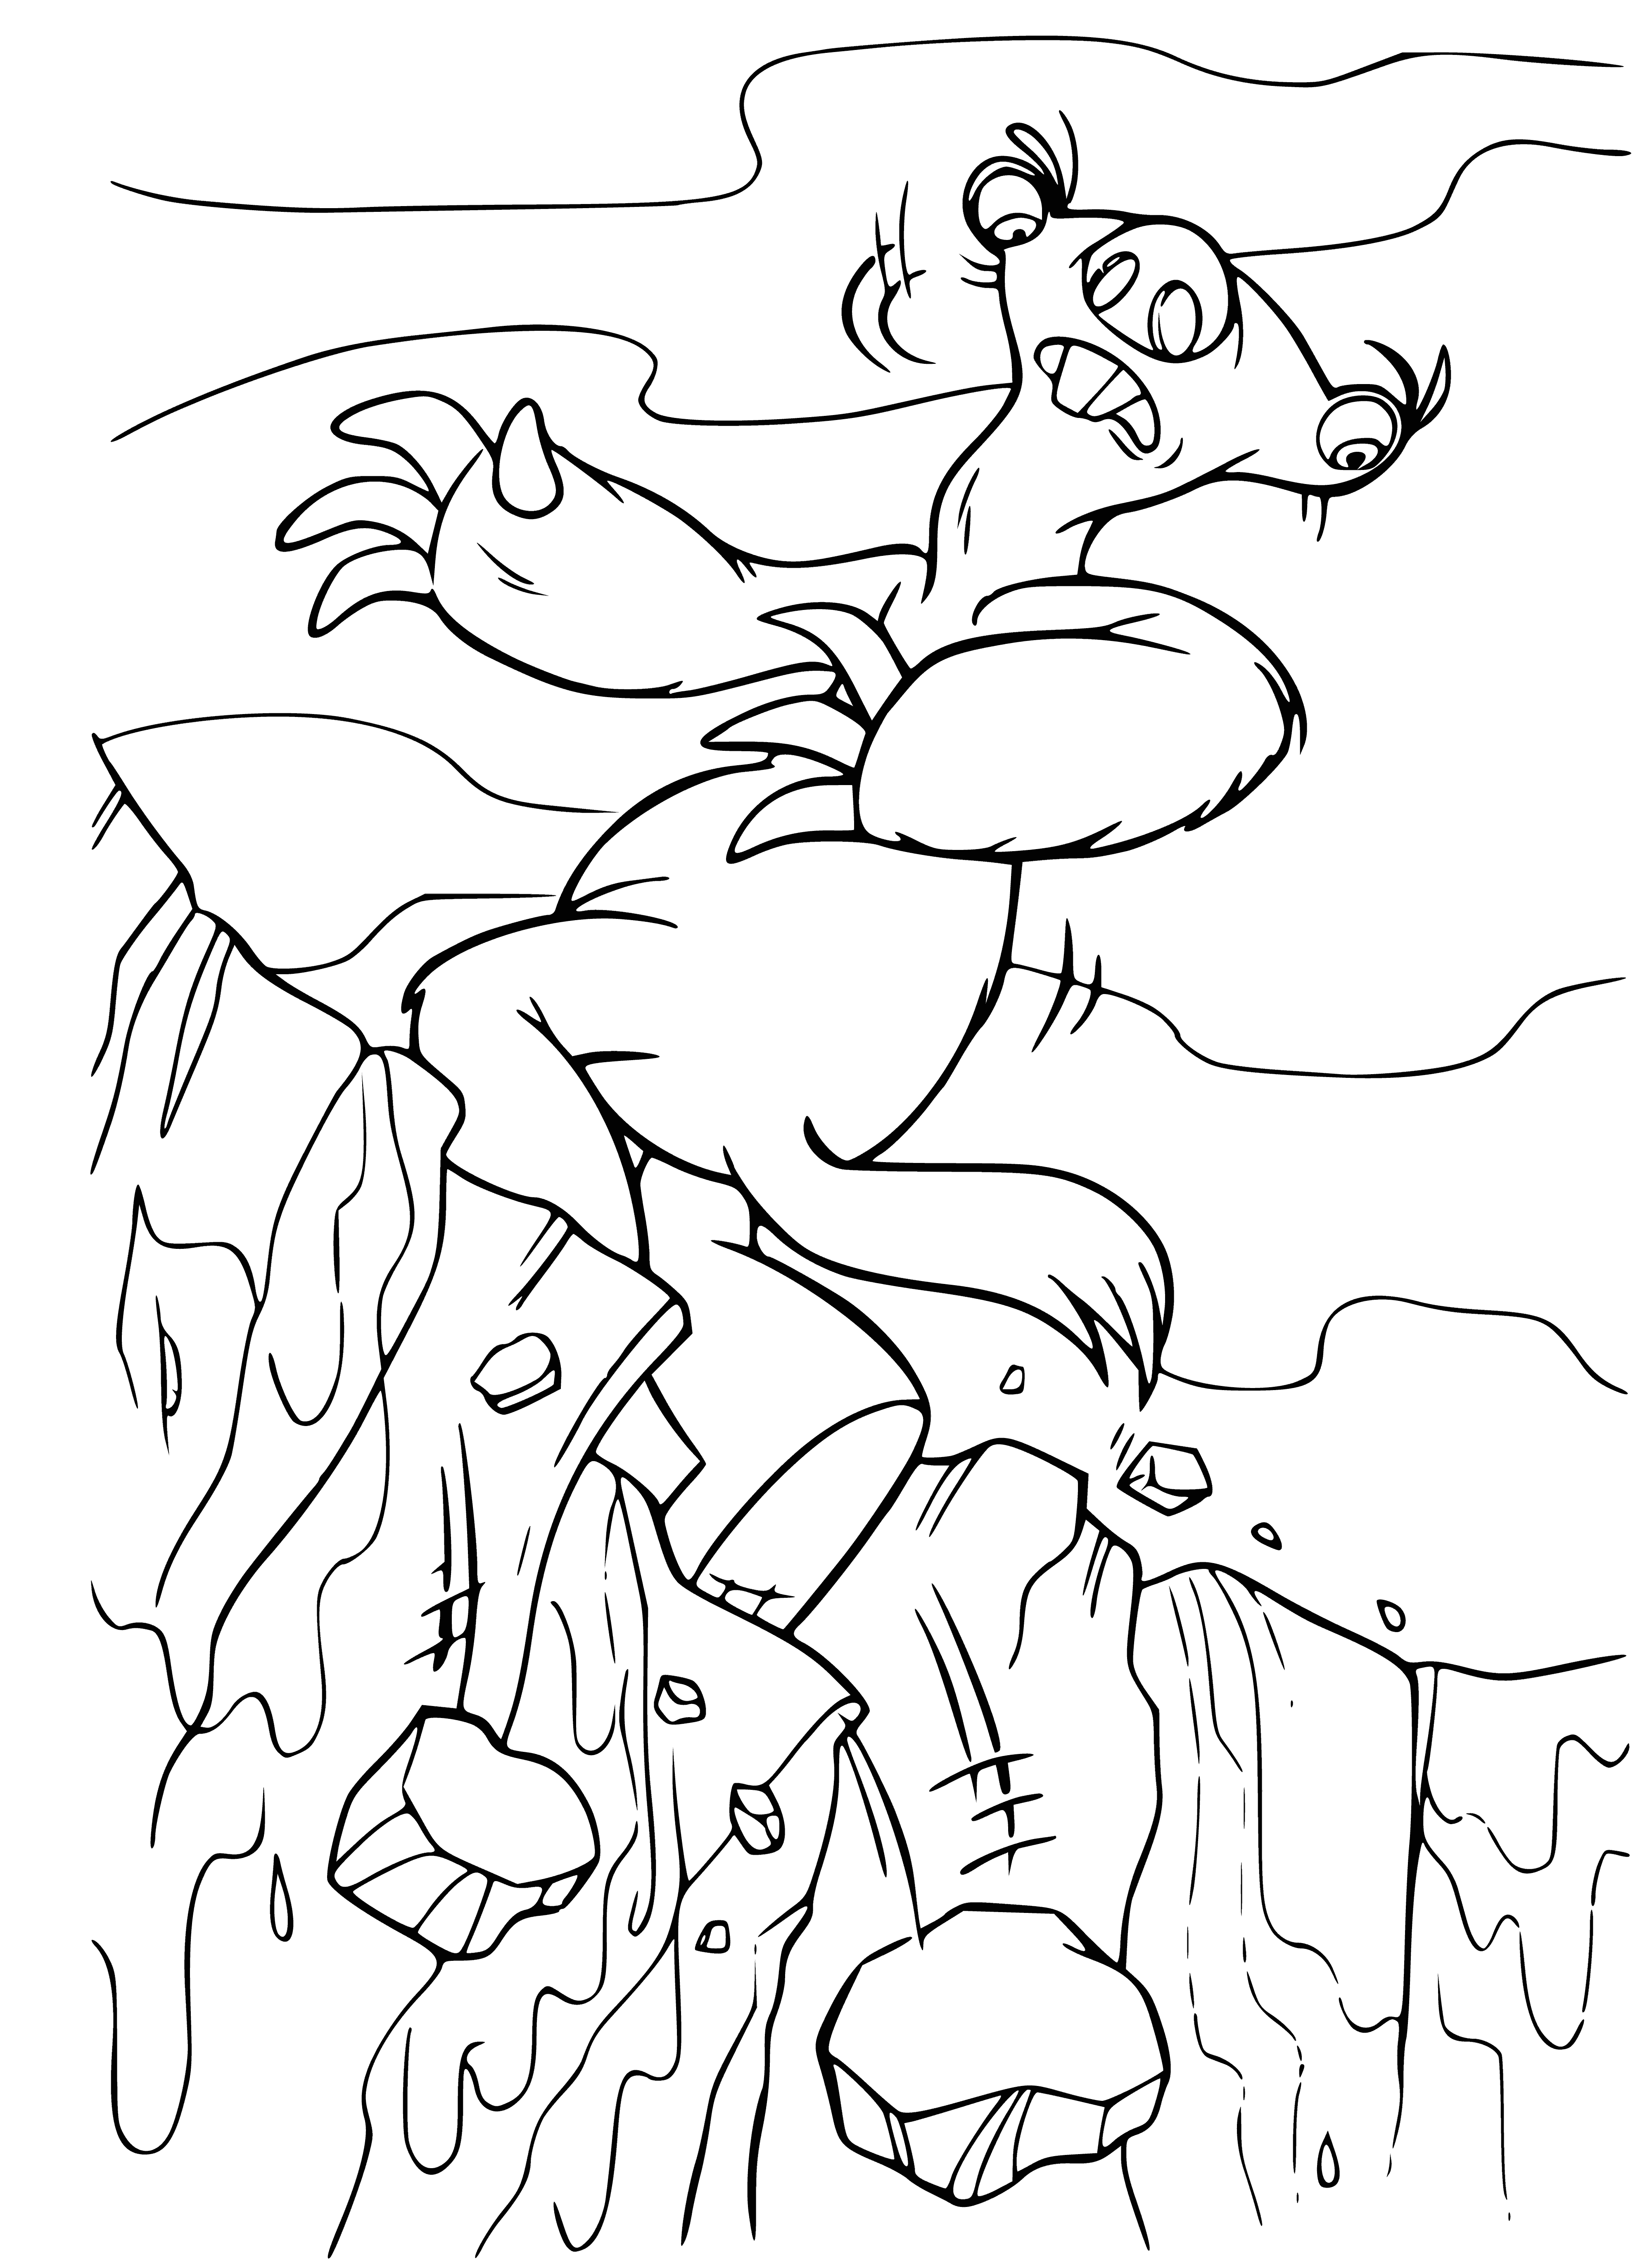 The dam may break coloring page